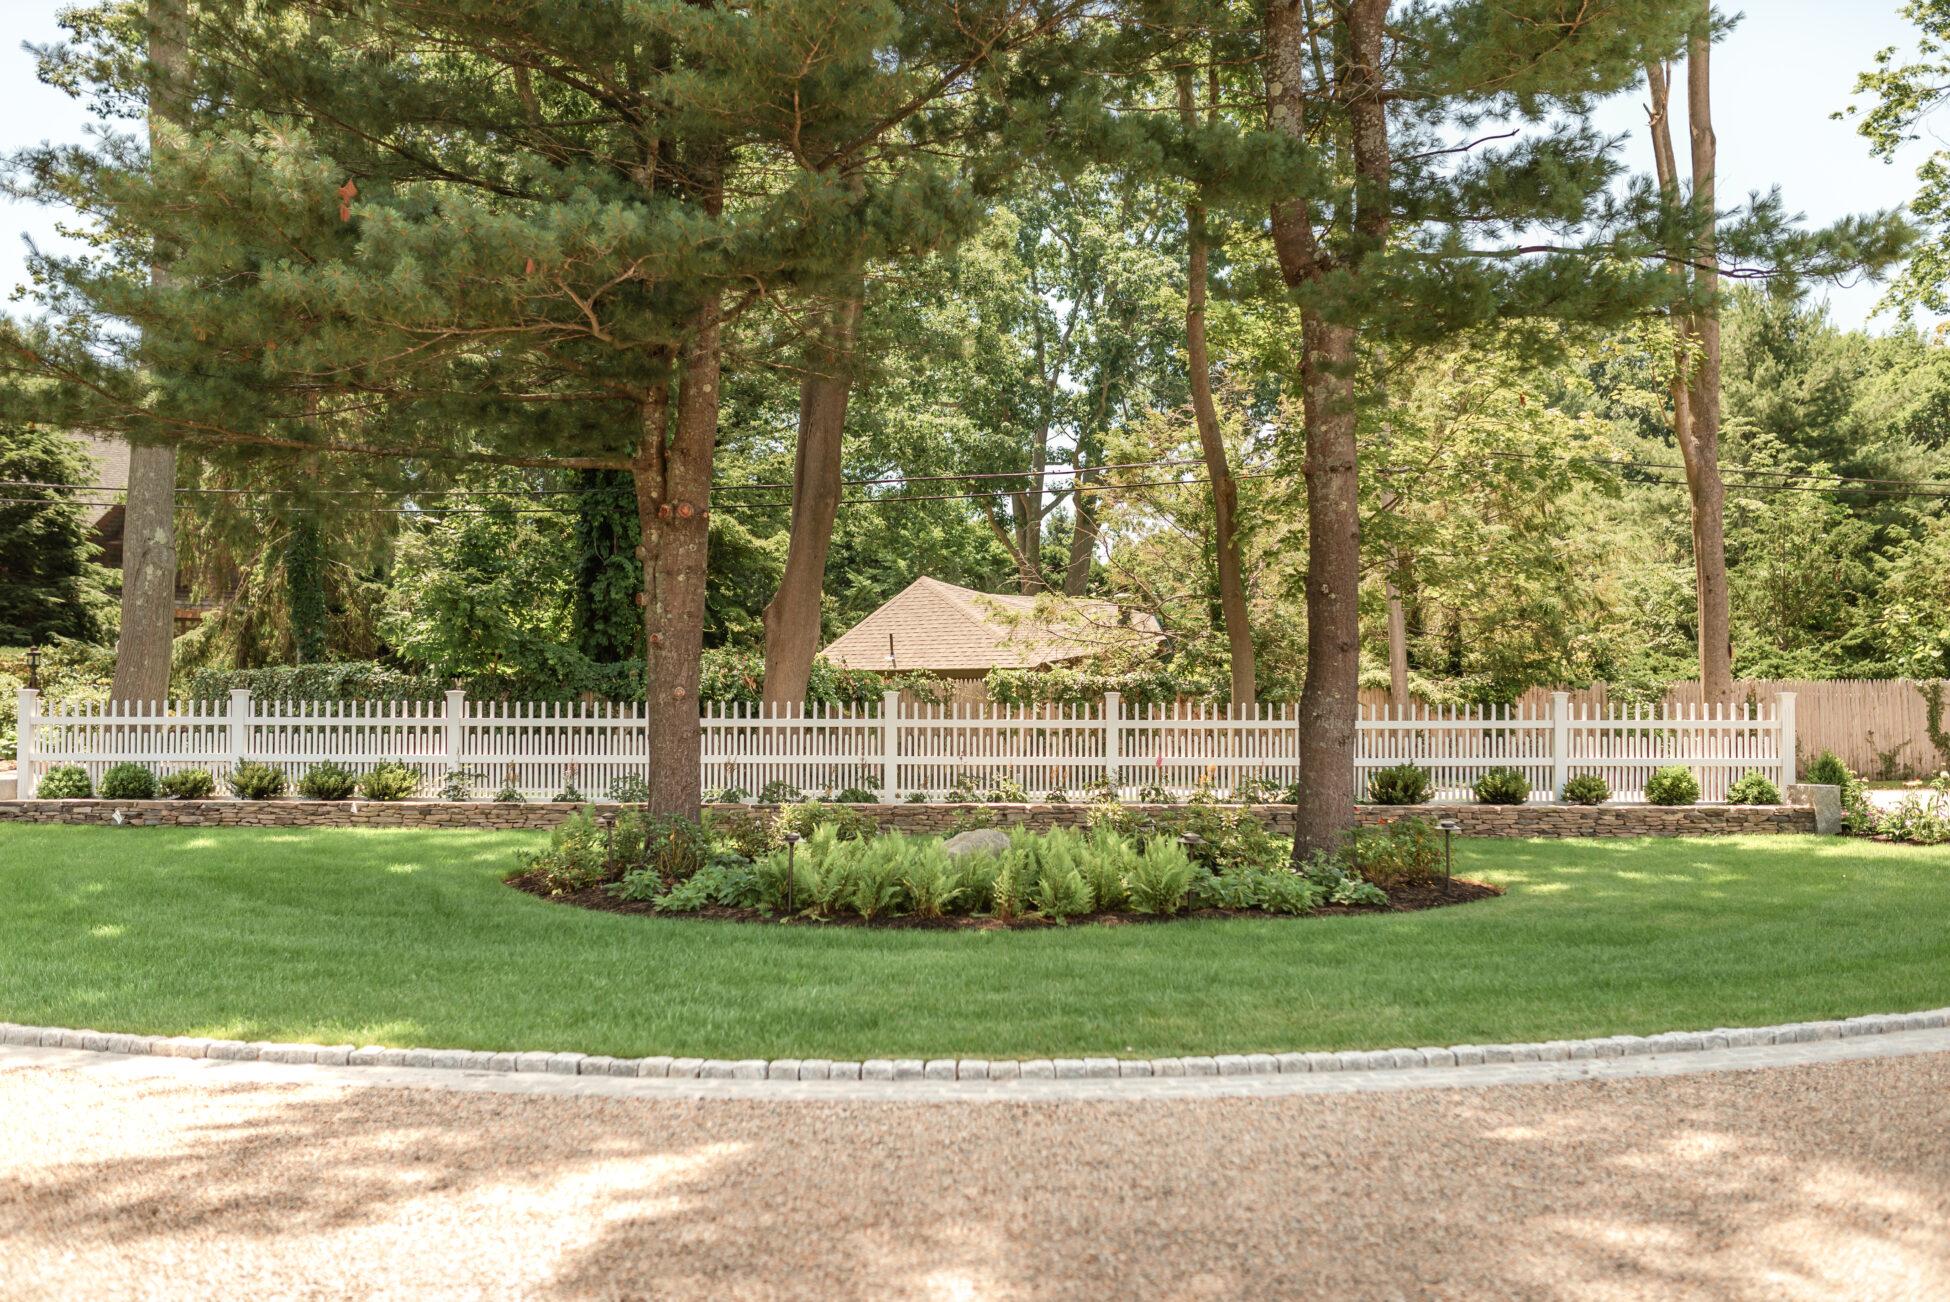 landscape garden in front of white picket fence